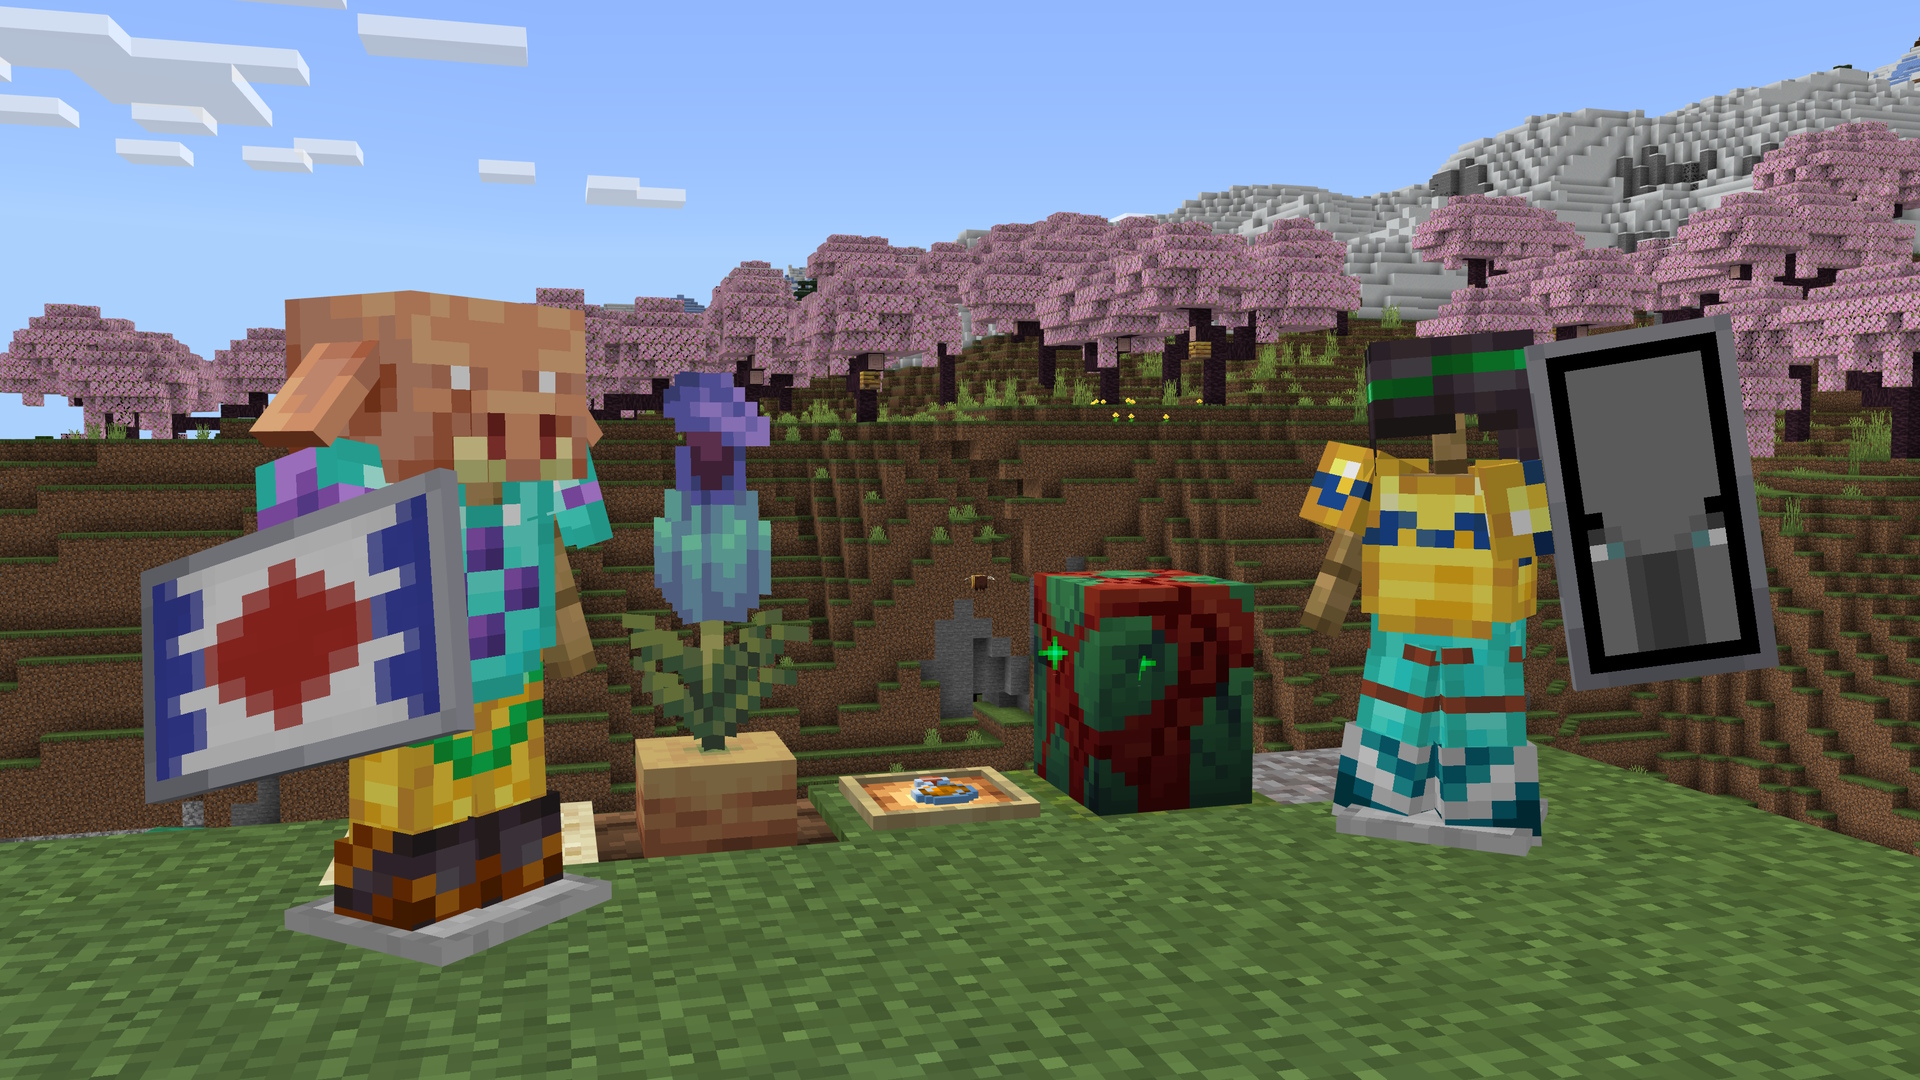 A Minecraft screenshot featuring armor stands holding shields wit banner patterns applied, and wearing trimmed armor. There is also a sniffer egg and a pitcher plant in the scene, and a cherry grove biome in the background.